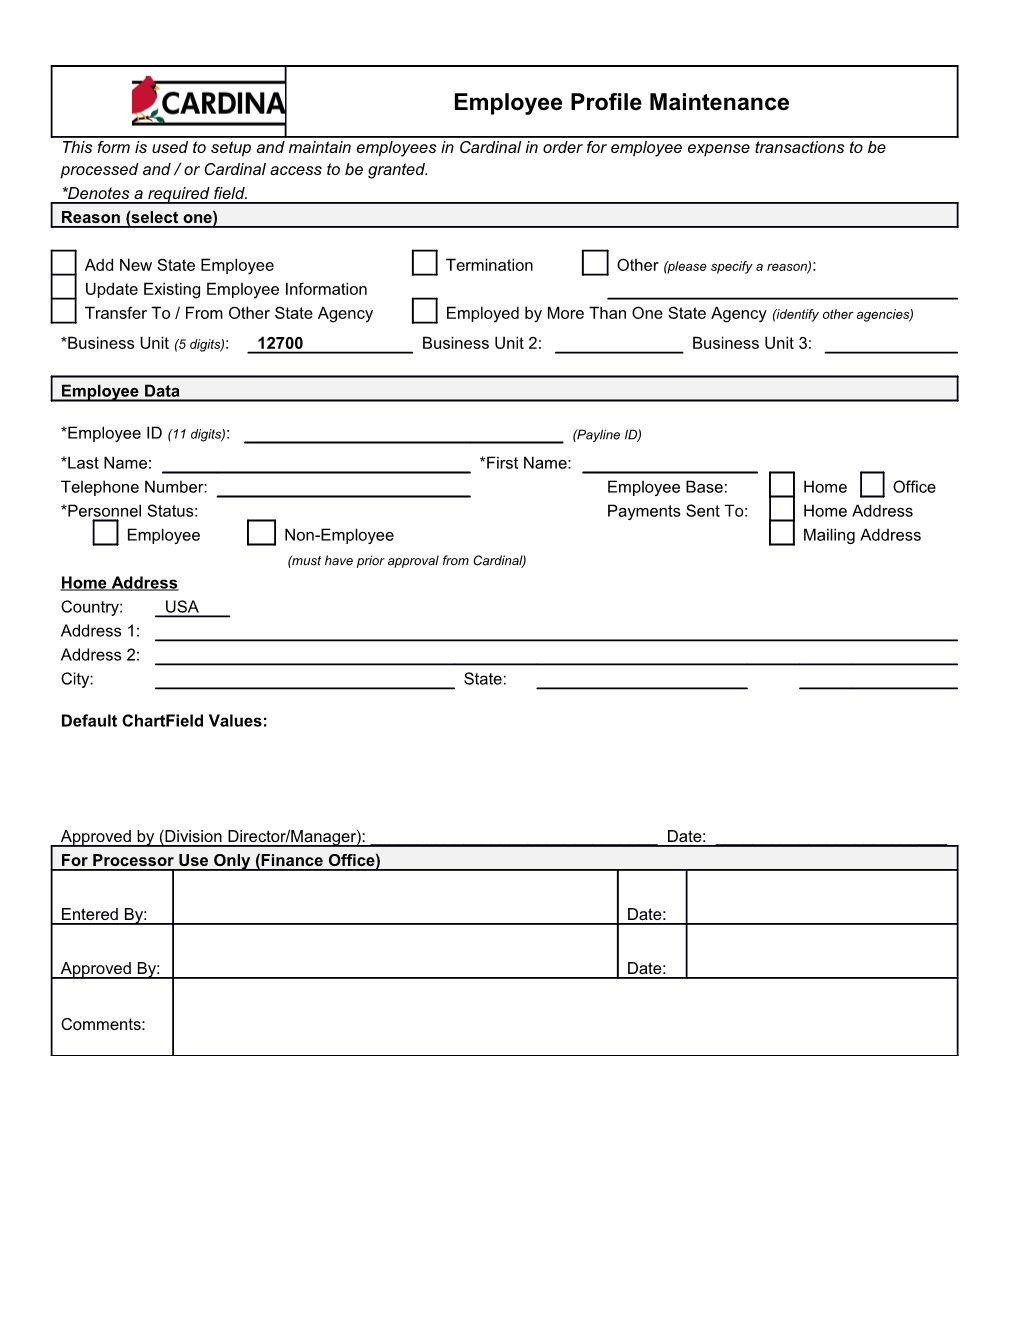 This Form Is Used to Setup and Maintain Employees in Cardinal in Order for Employee Expense